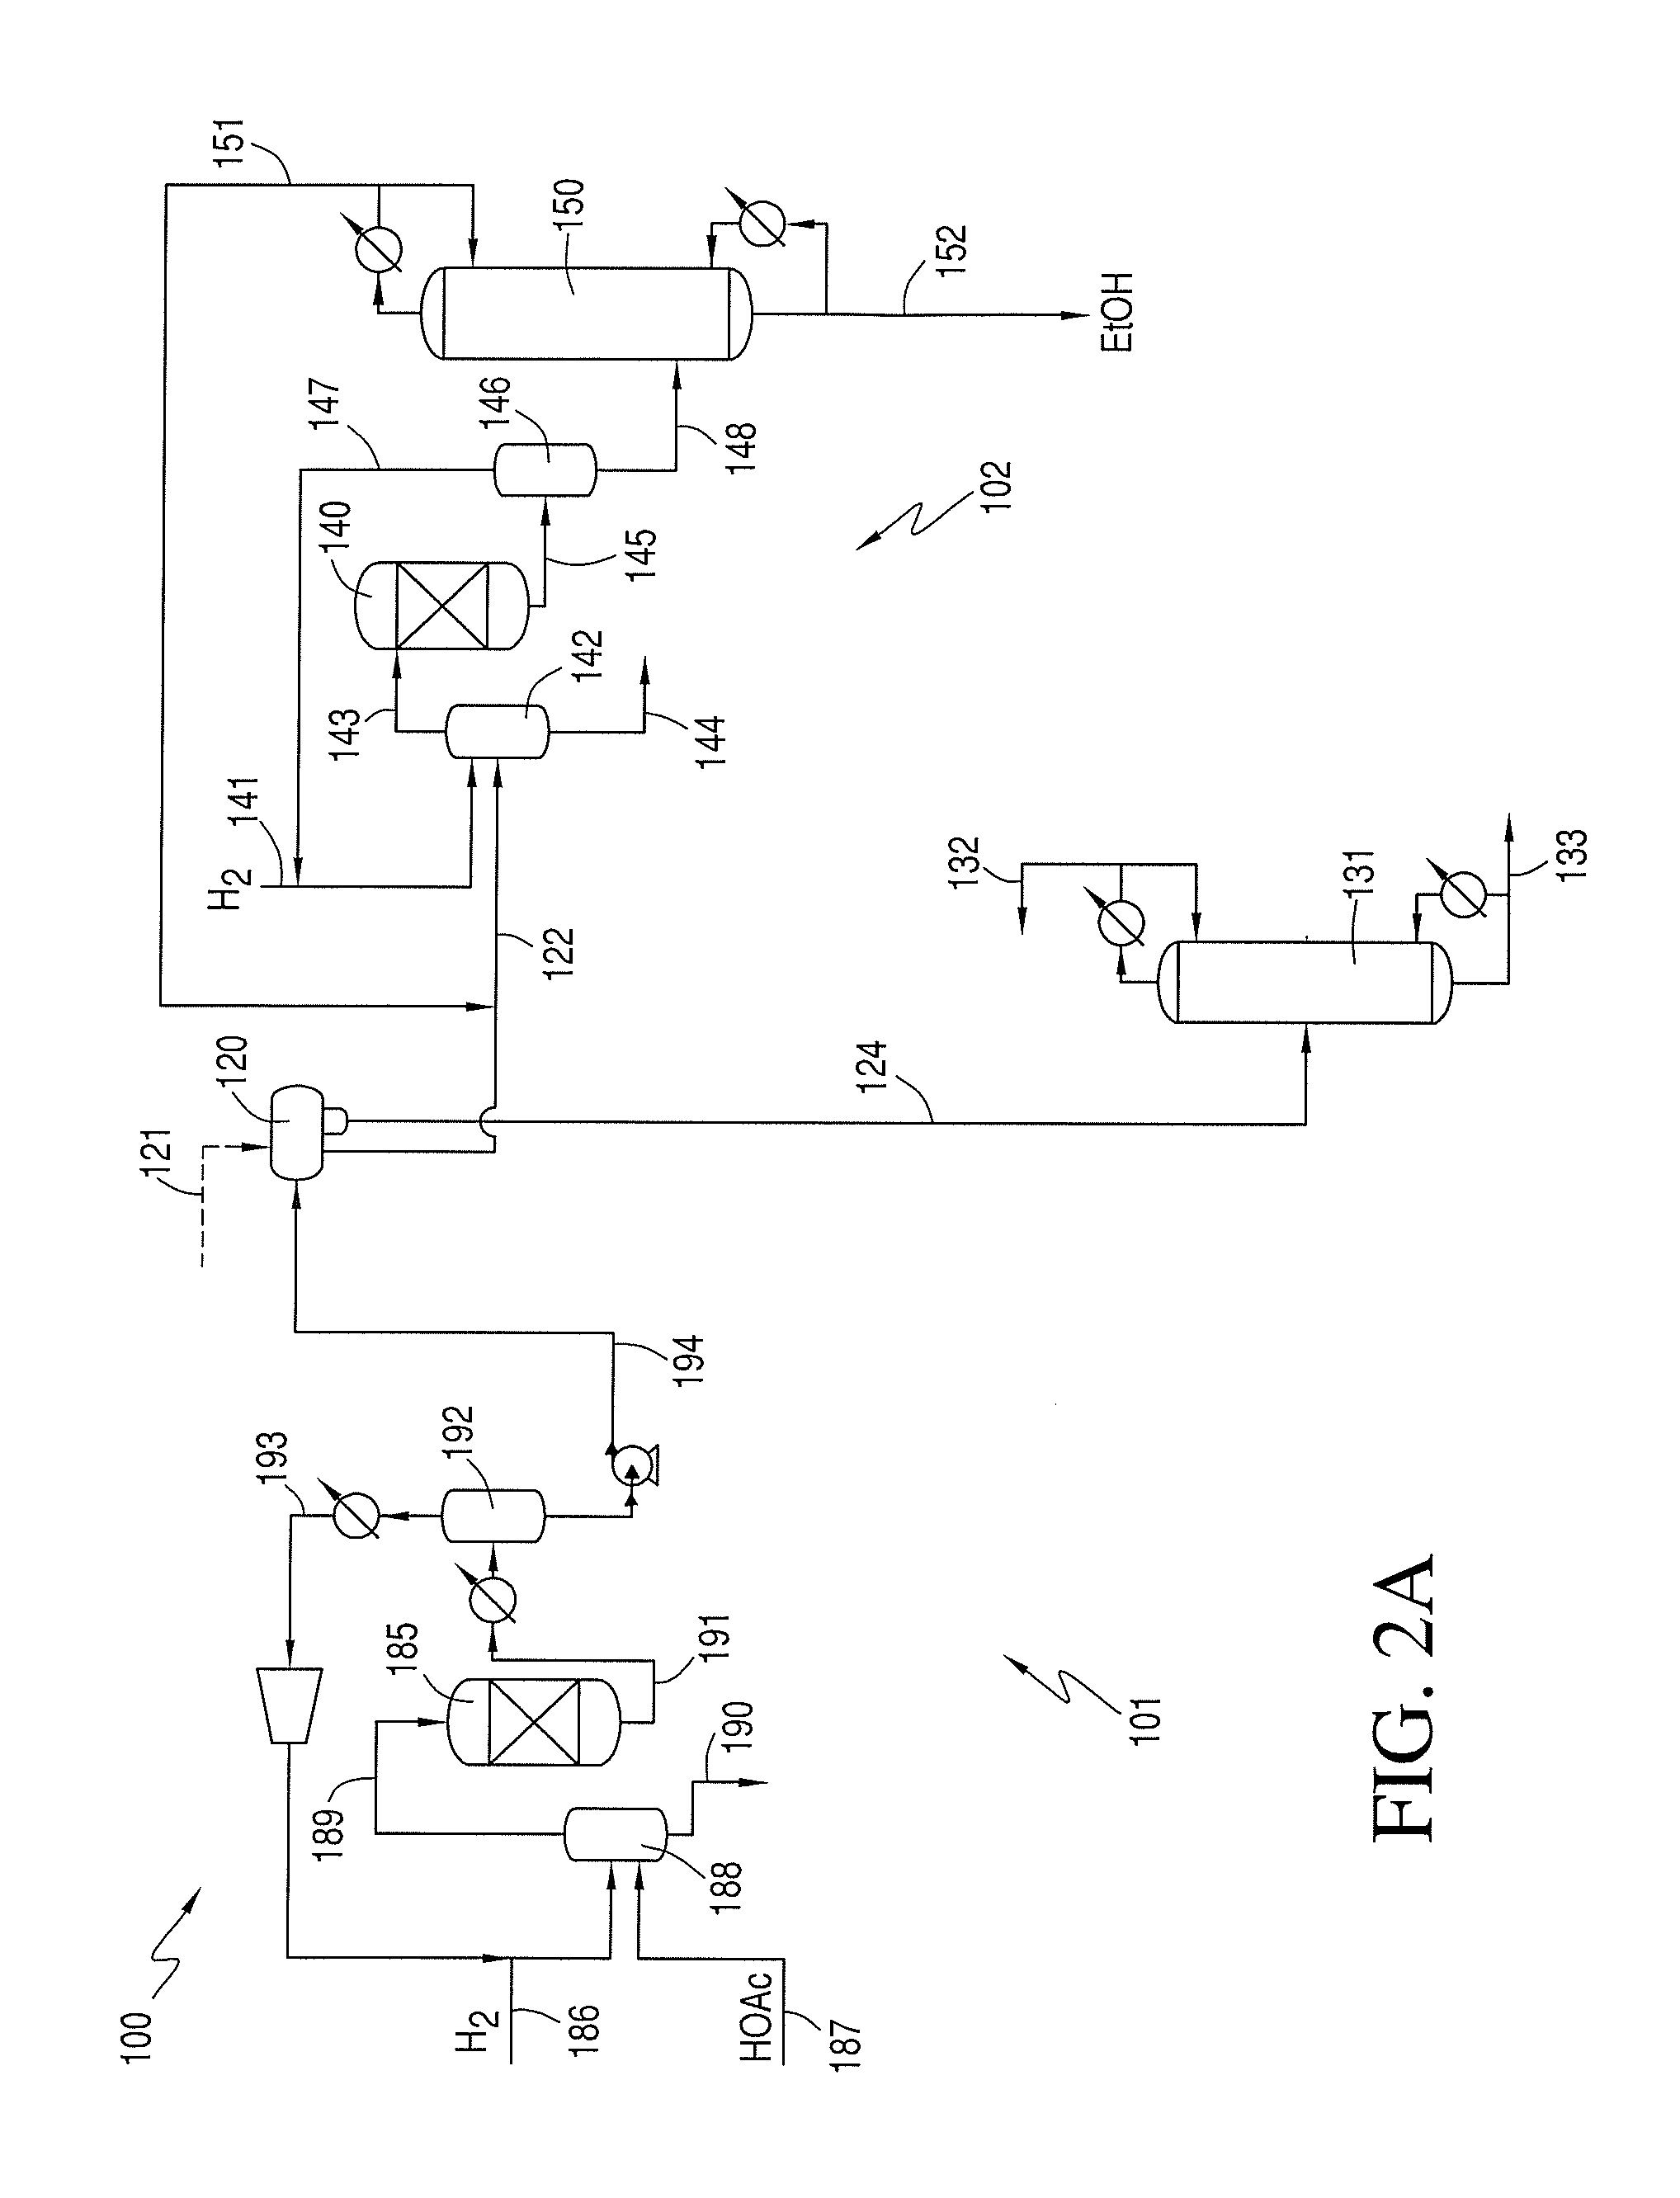 Phasing Reactor Product from Hydrogenating Acetic Acid Into Ethyl Acetate Feed to Produce Ethanol